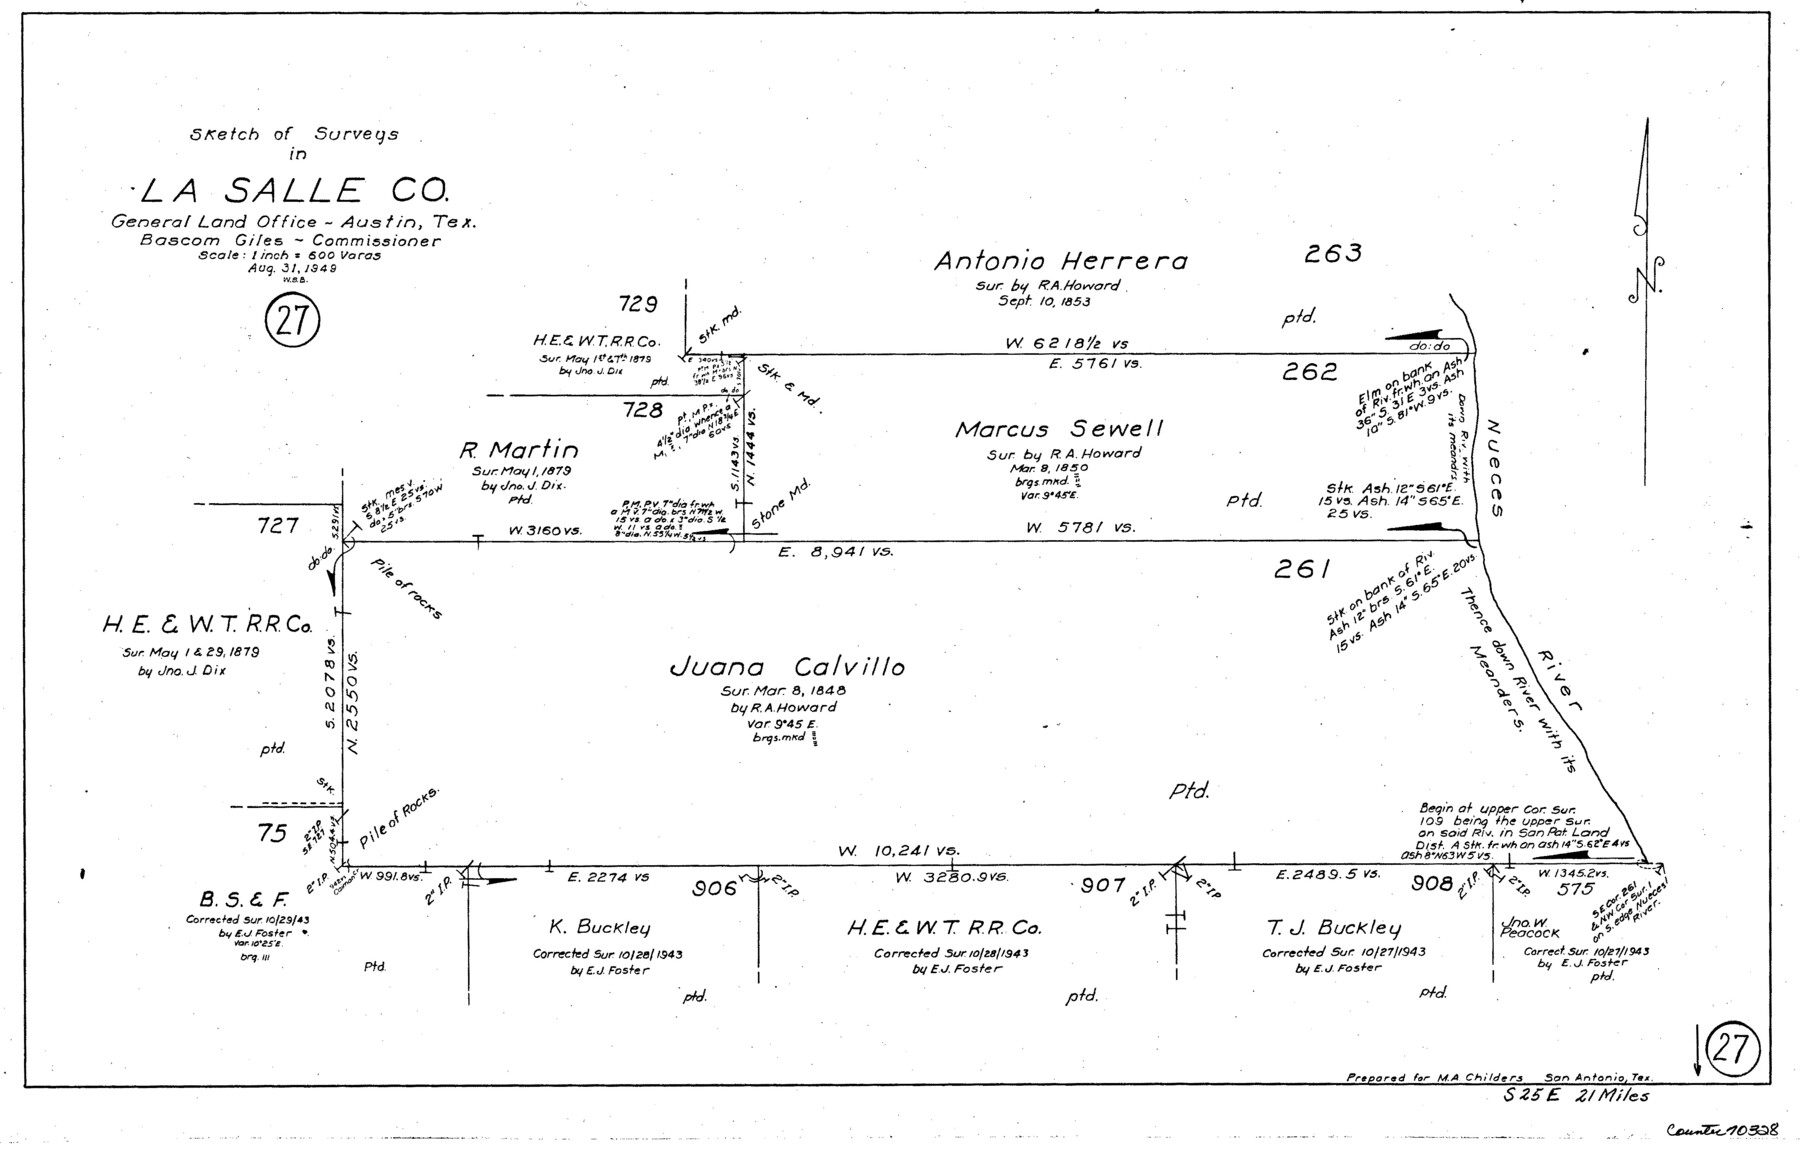 70328, La Salle County Working Sketch 27, General Map Collection